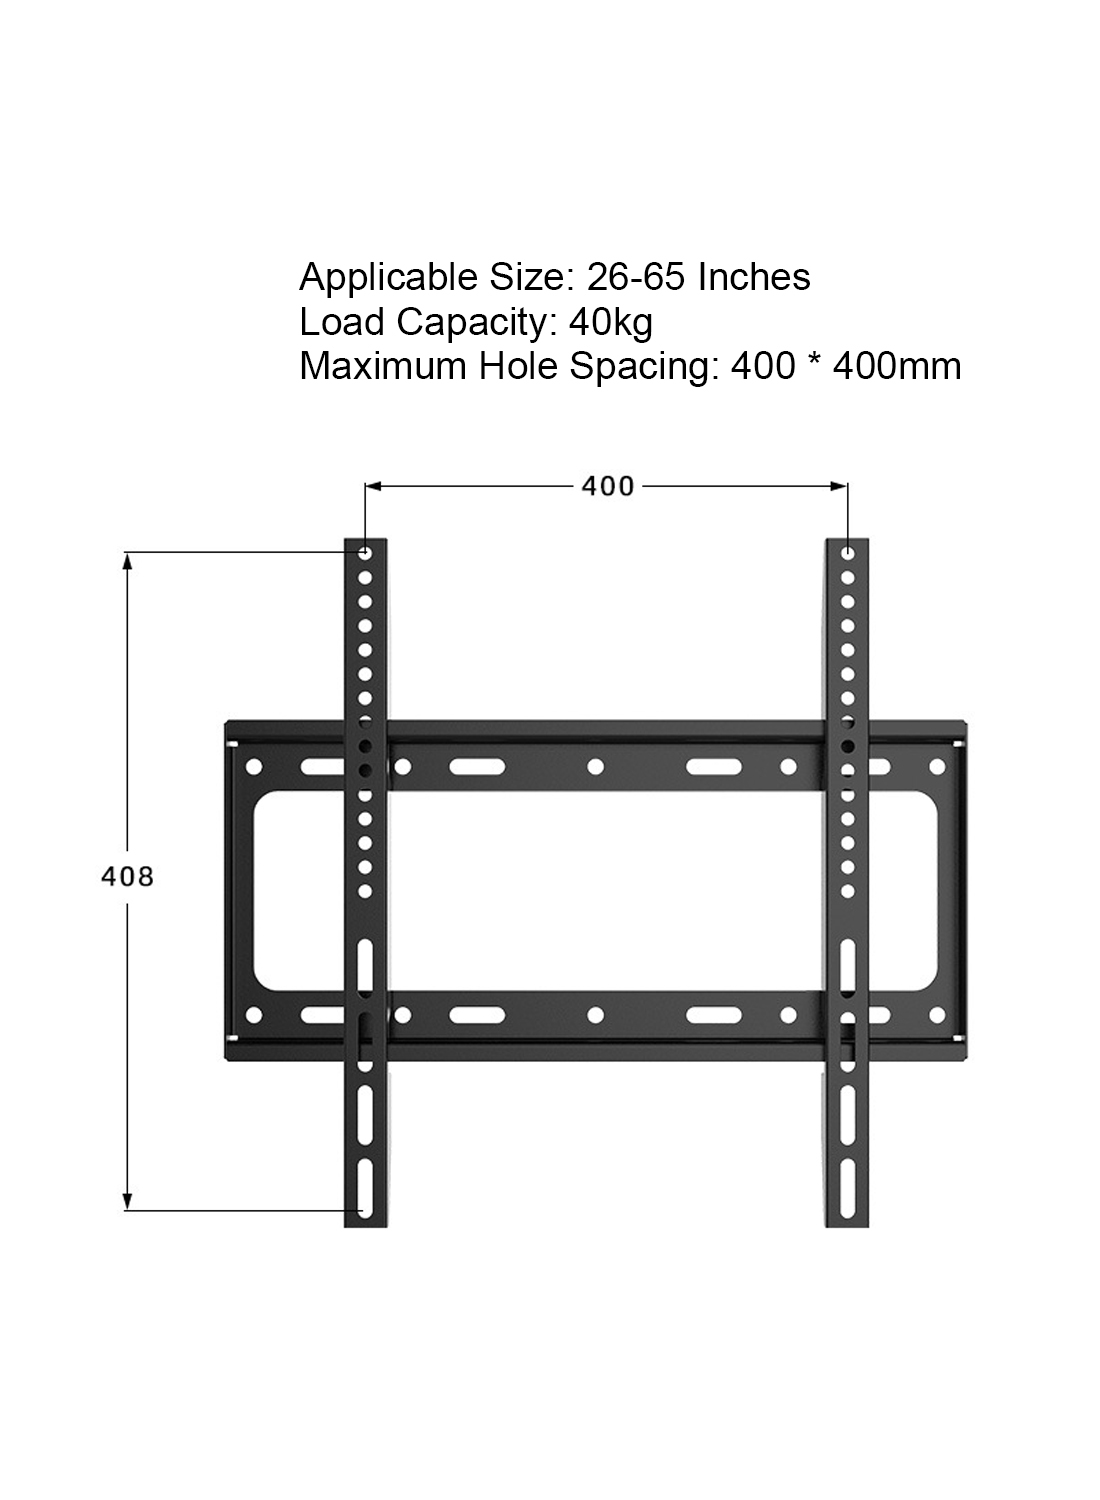 TV Wall Mount Bracket for 26 to 65 Inch Flat Screen LED, LCD TV’S Low Profile, Fixed and Space Saving TV Bracket